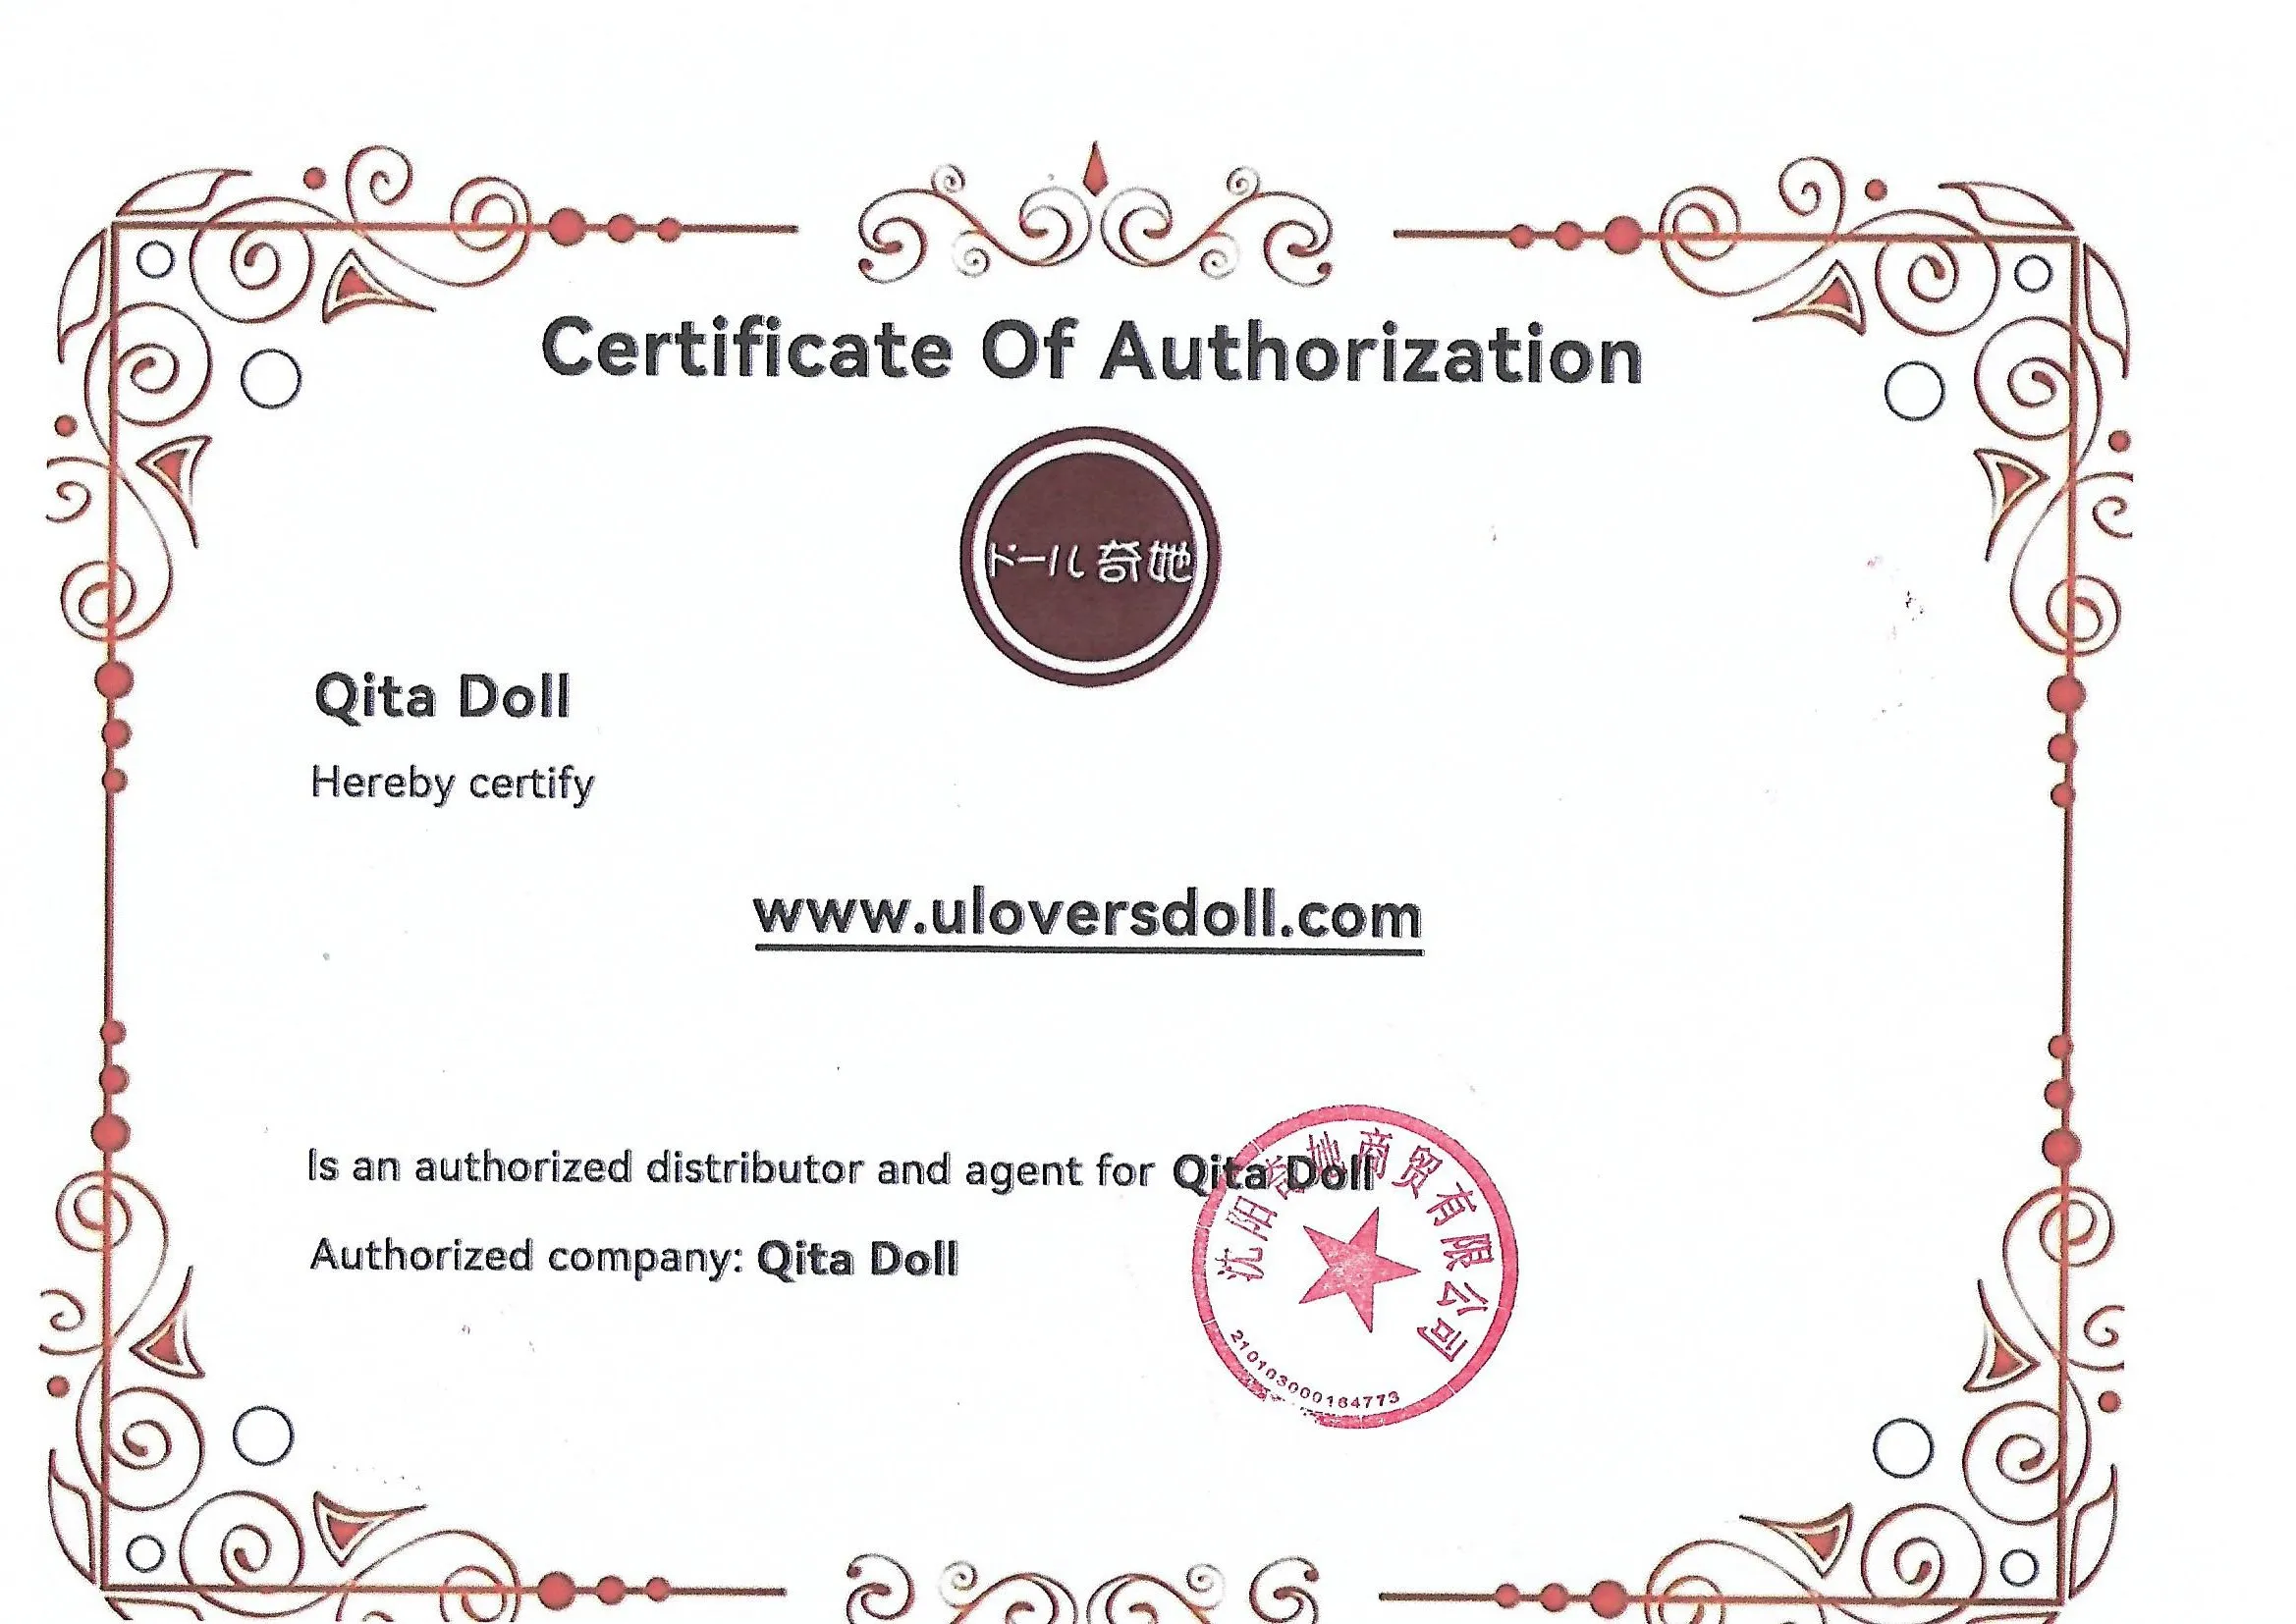 Authorization certificate for Qita doll